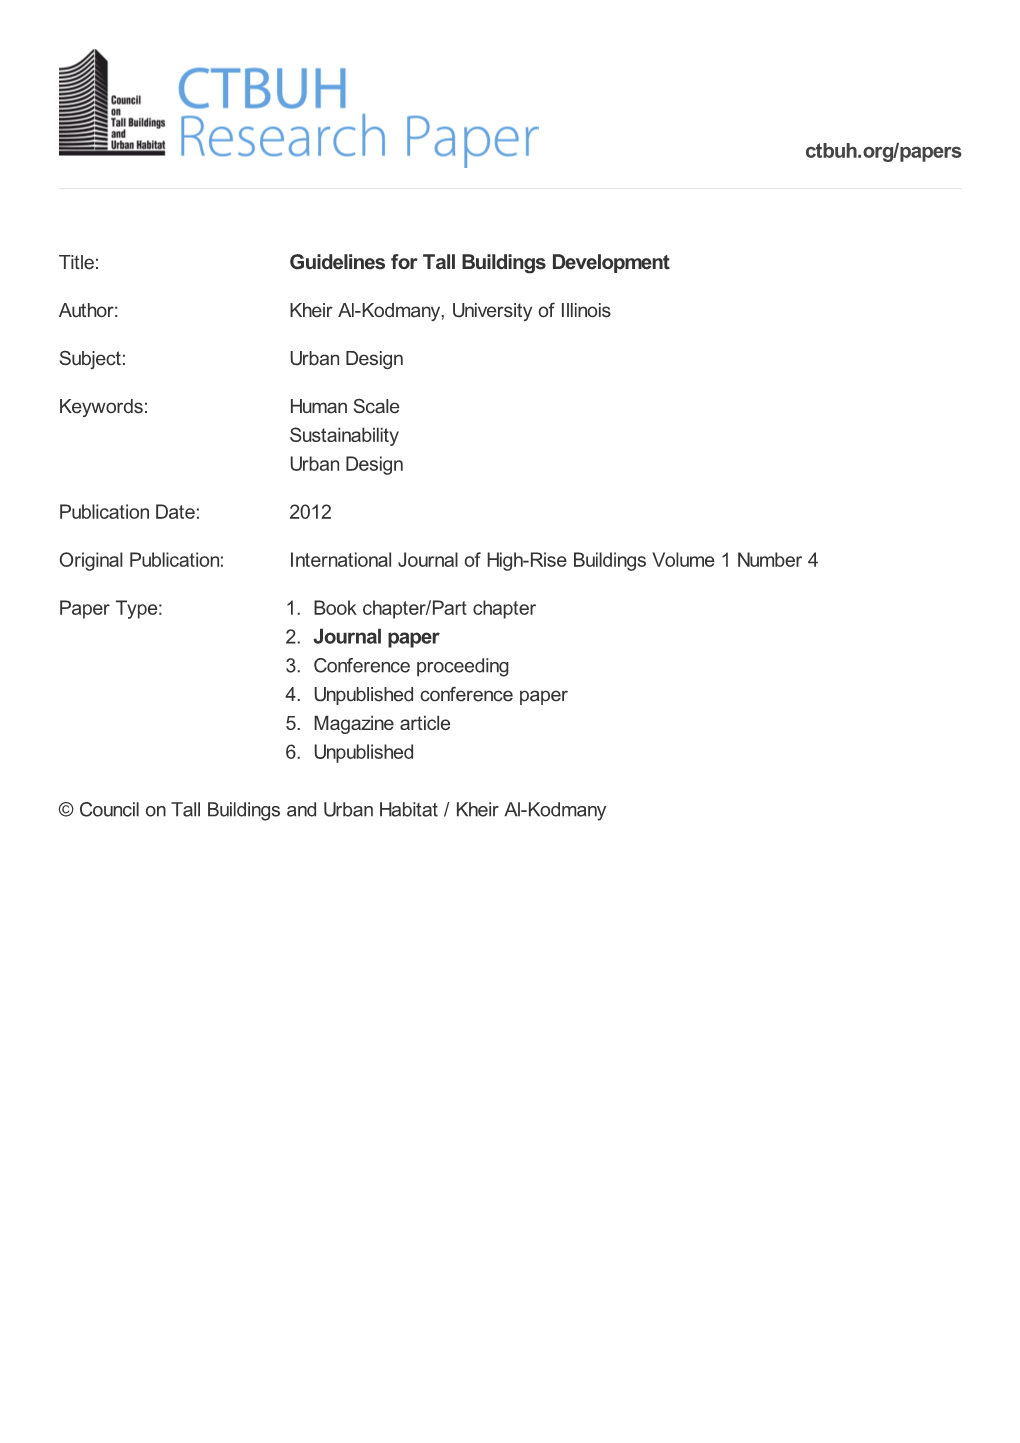 Guidelines for Tall Buildings Development 2. Journal Paper